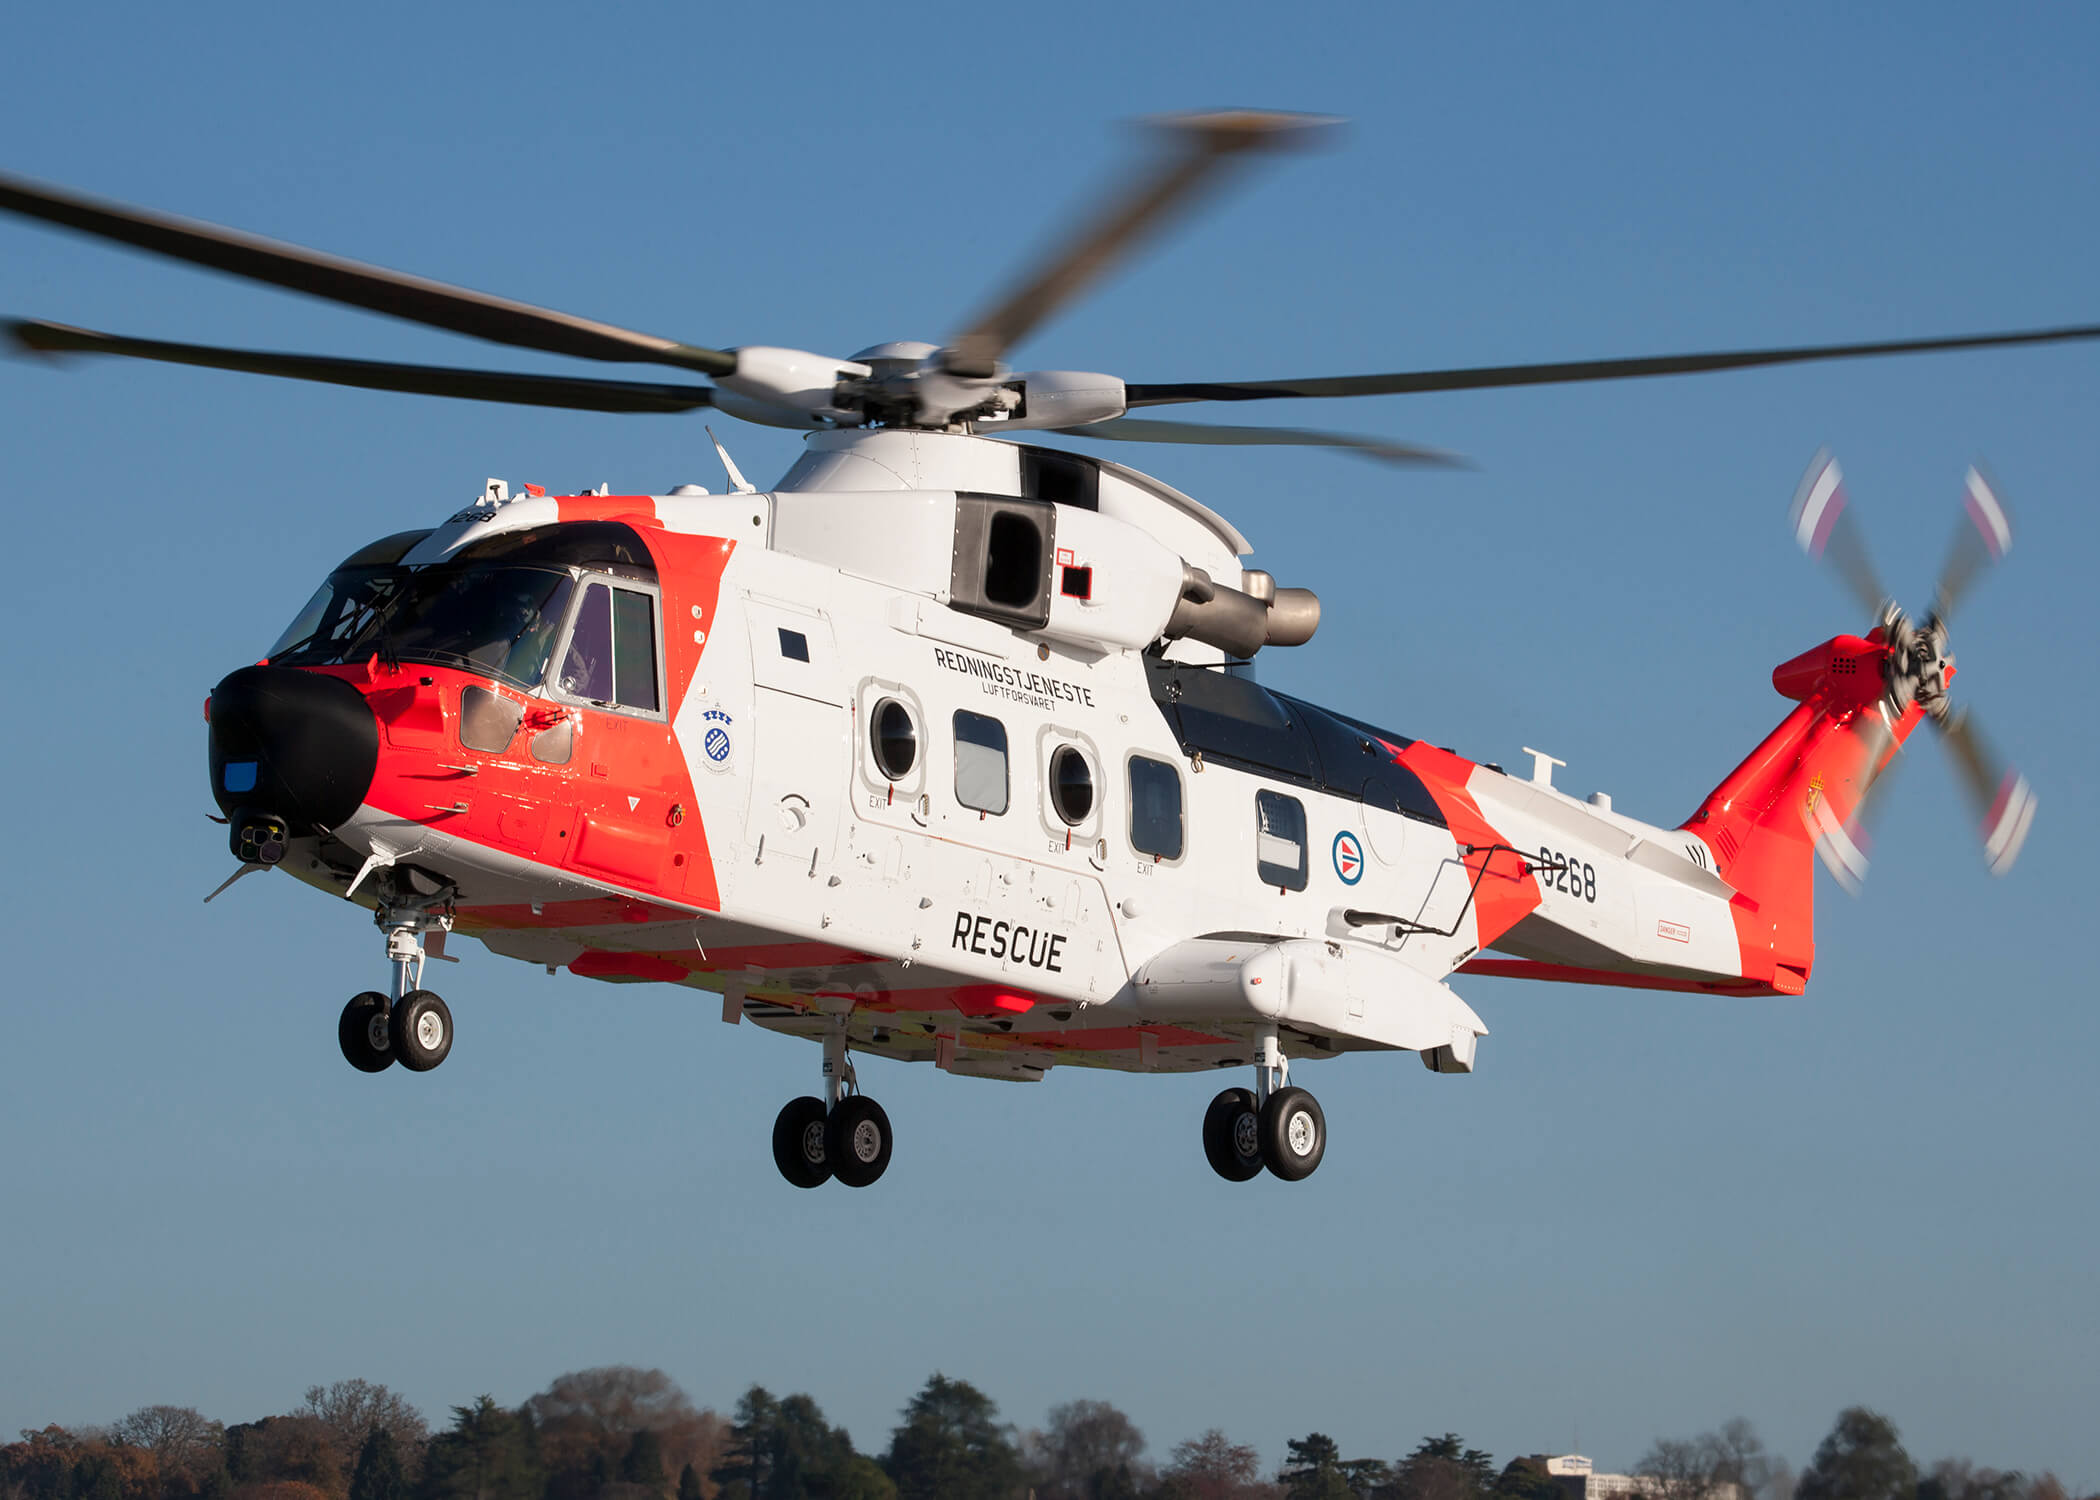 The Leonardo AW101 was handed over to the Royal Norwegian Air Force just a week before the incident, and was still a month away from its official delivery ceremony. Leonardo Photo